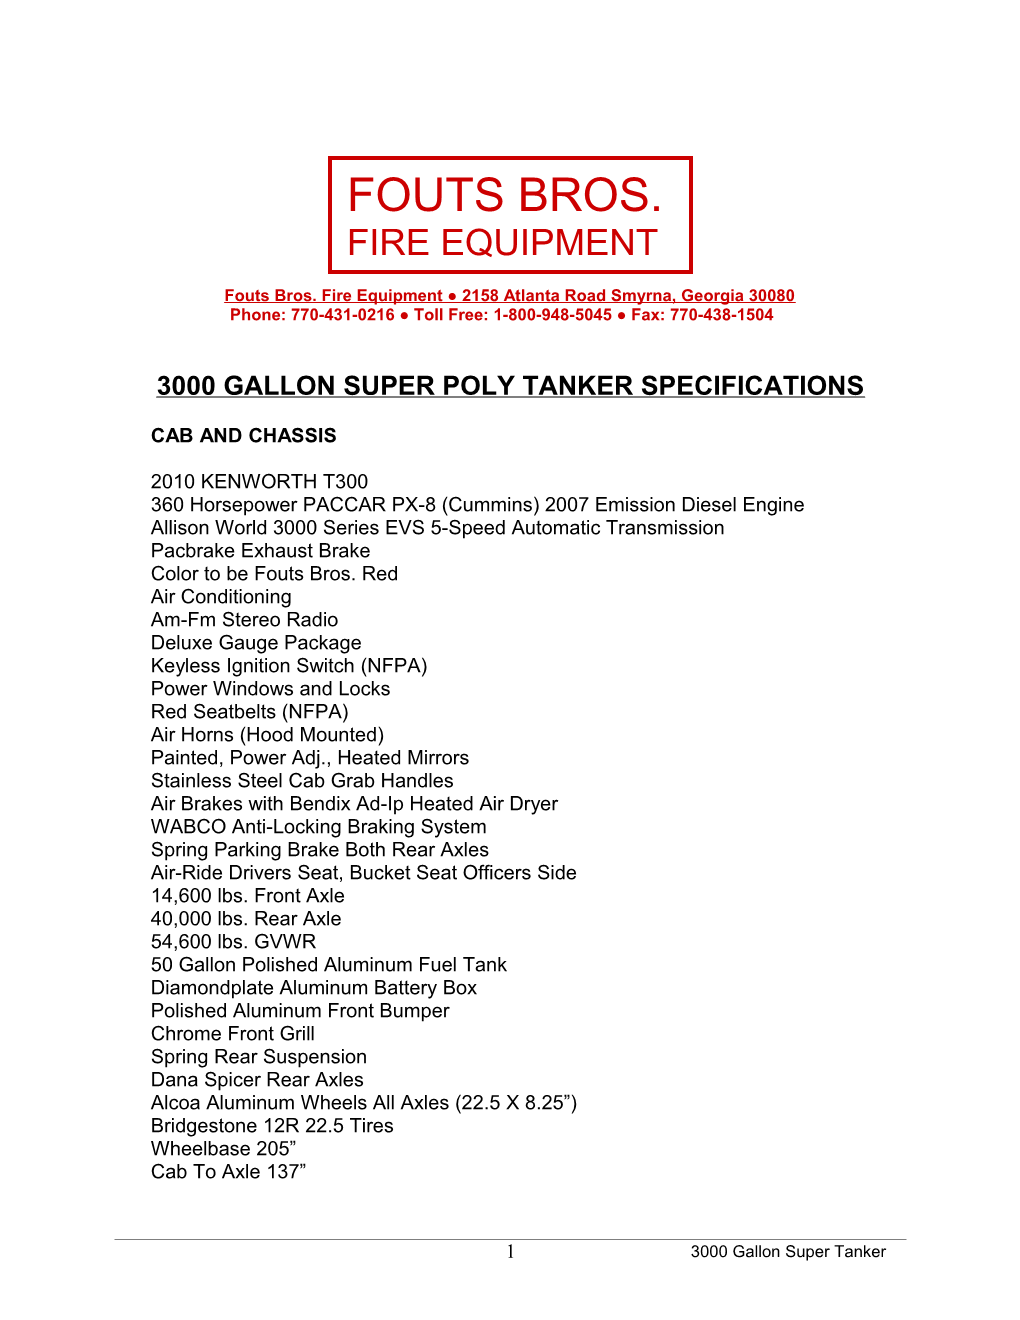 3000 Gallon Super Poly Tanker Specifications